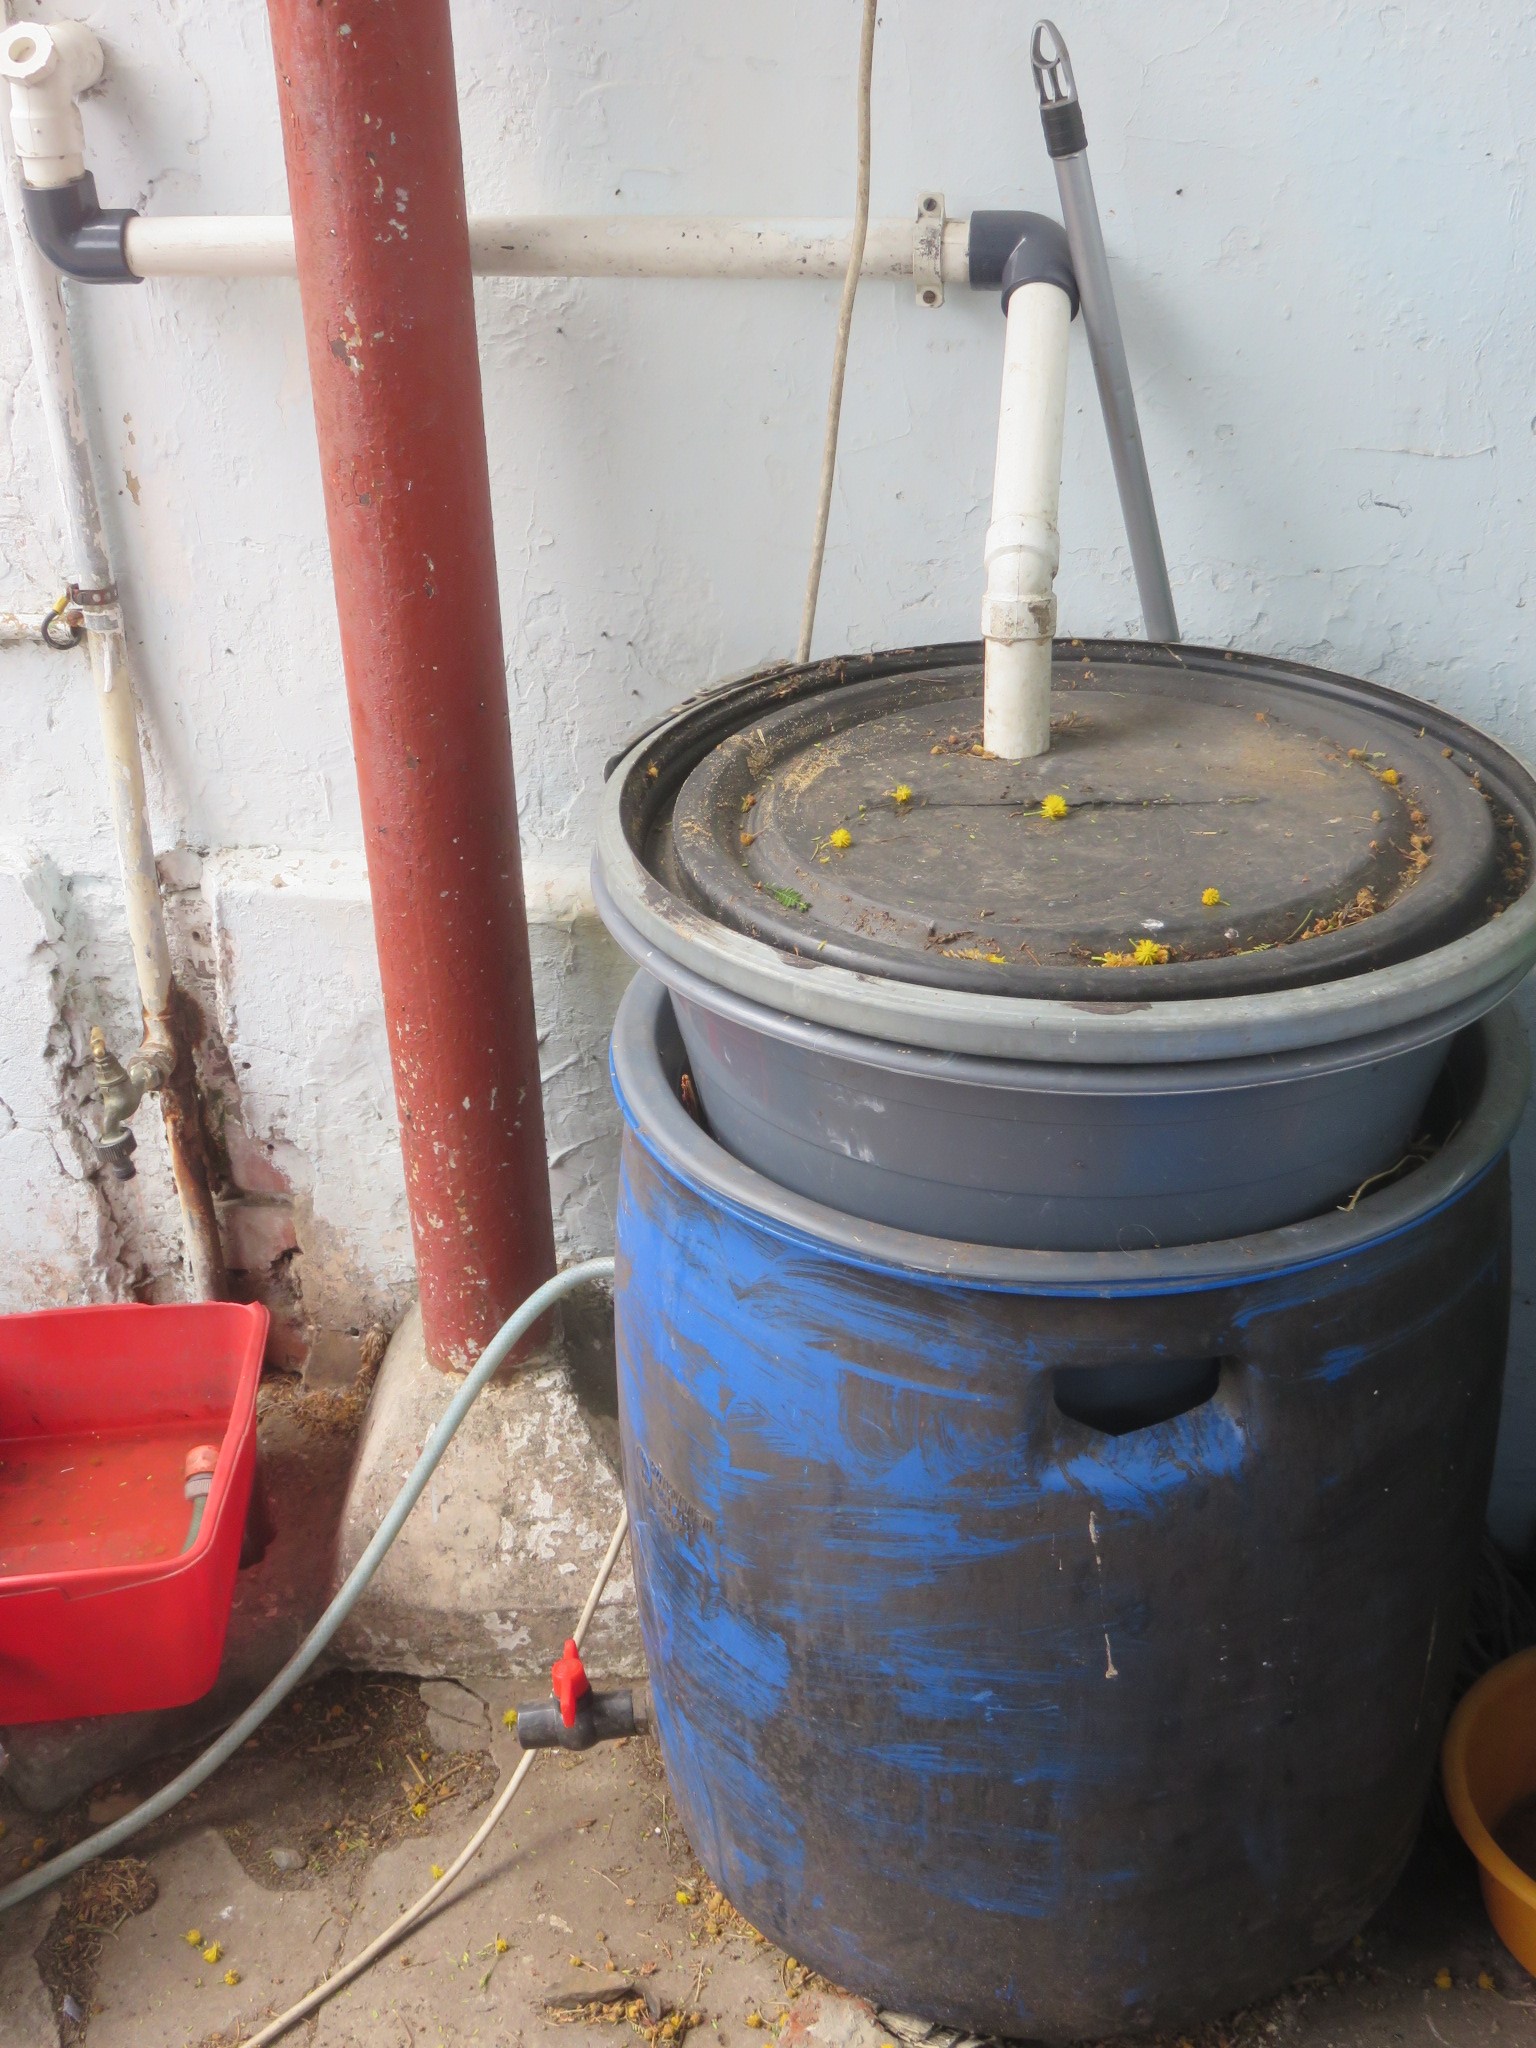 The first stage of recycling grey water in our system: worm bin and fat digester barrel.